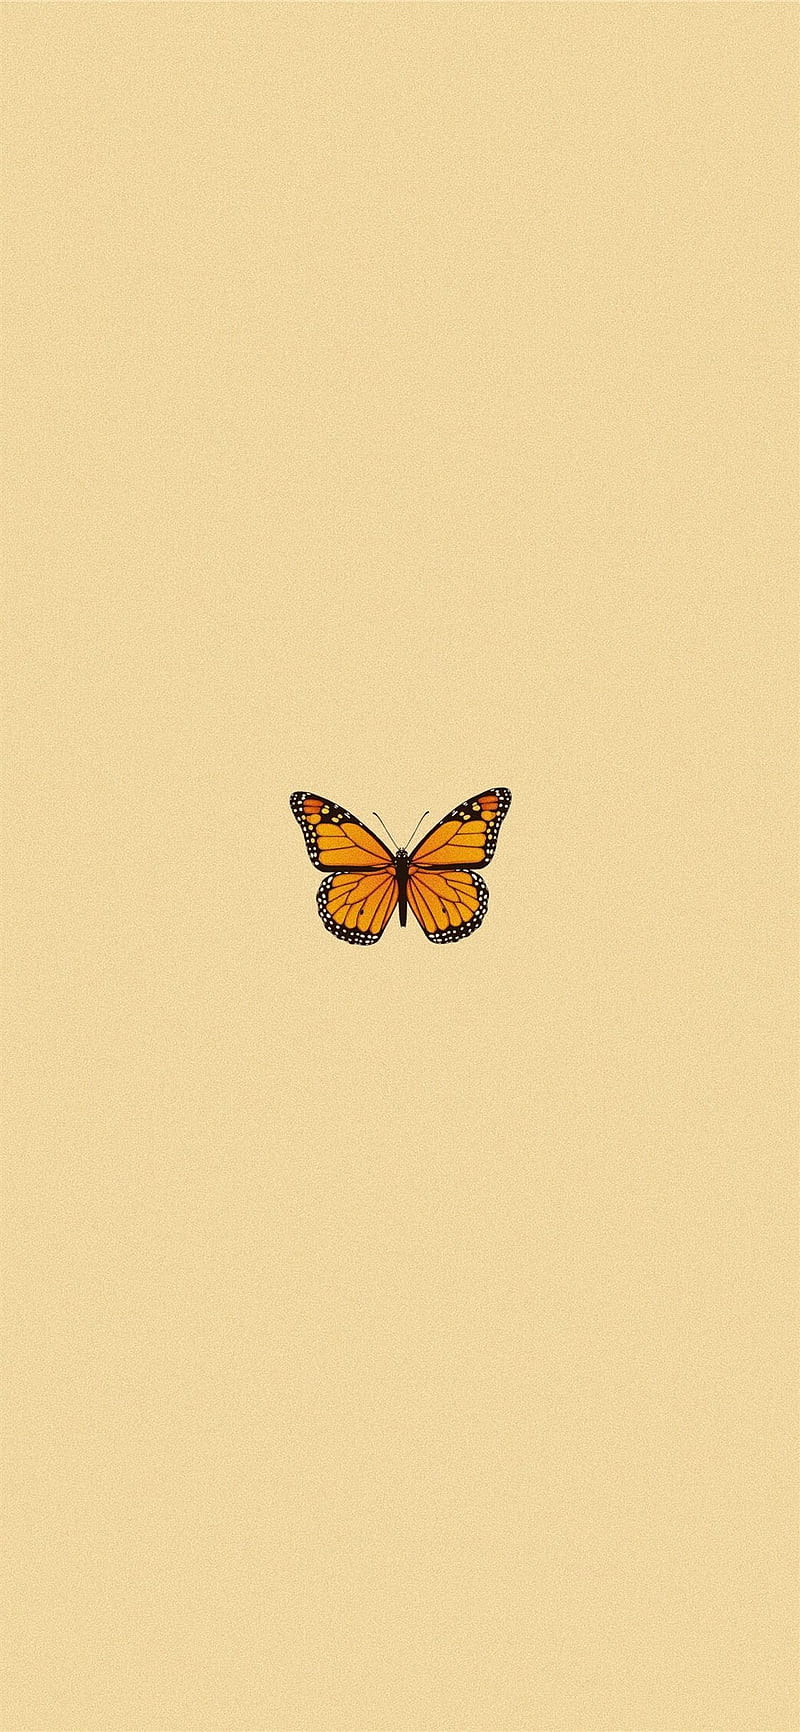 14600 Yellow Butterfly Illustrations RoyaltyFree Vector Graphics  Clip  Art  iStock  Clouded yellow butterfly Yellow butterfly white background Yellow  butterfly on white